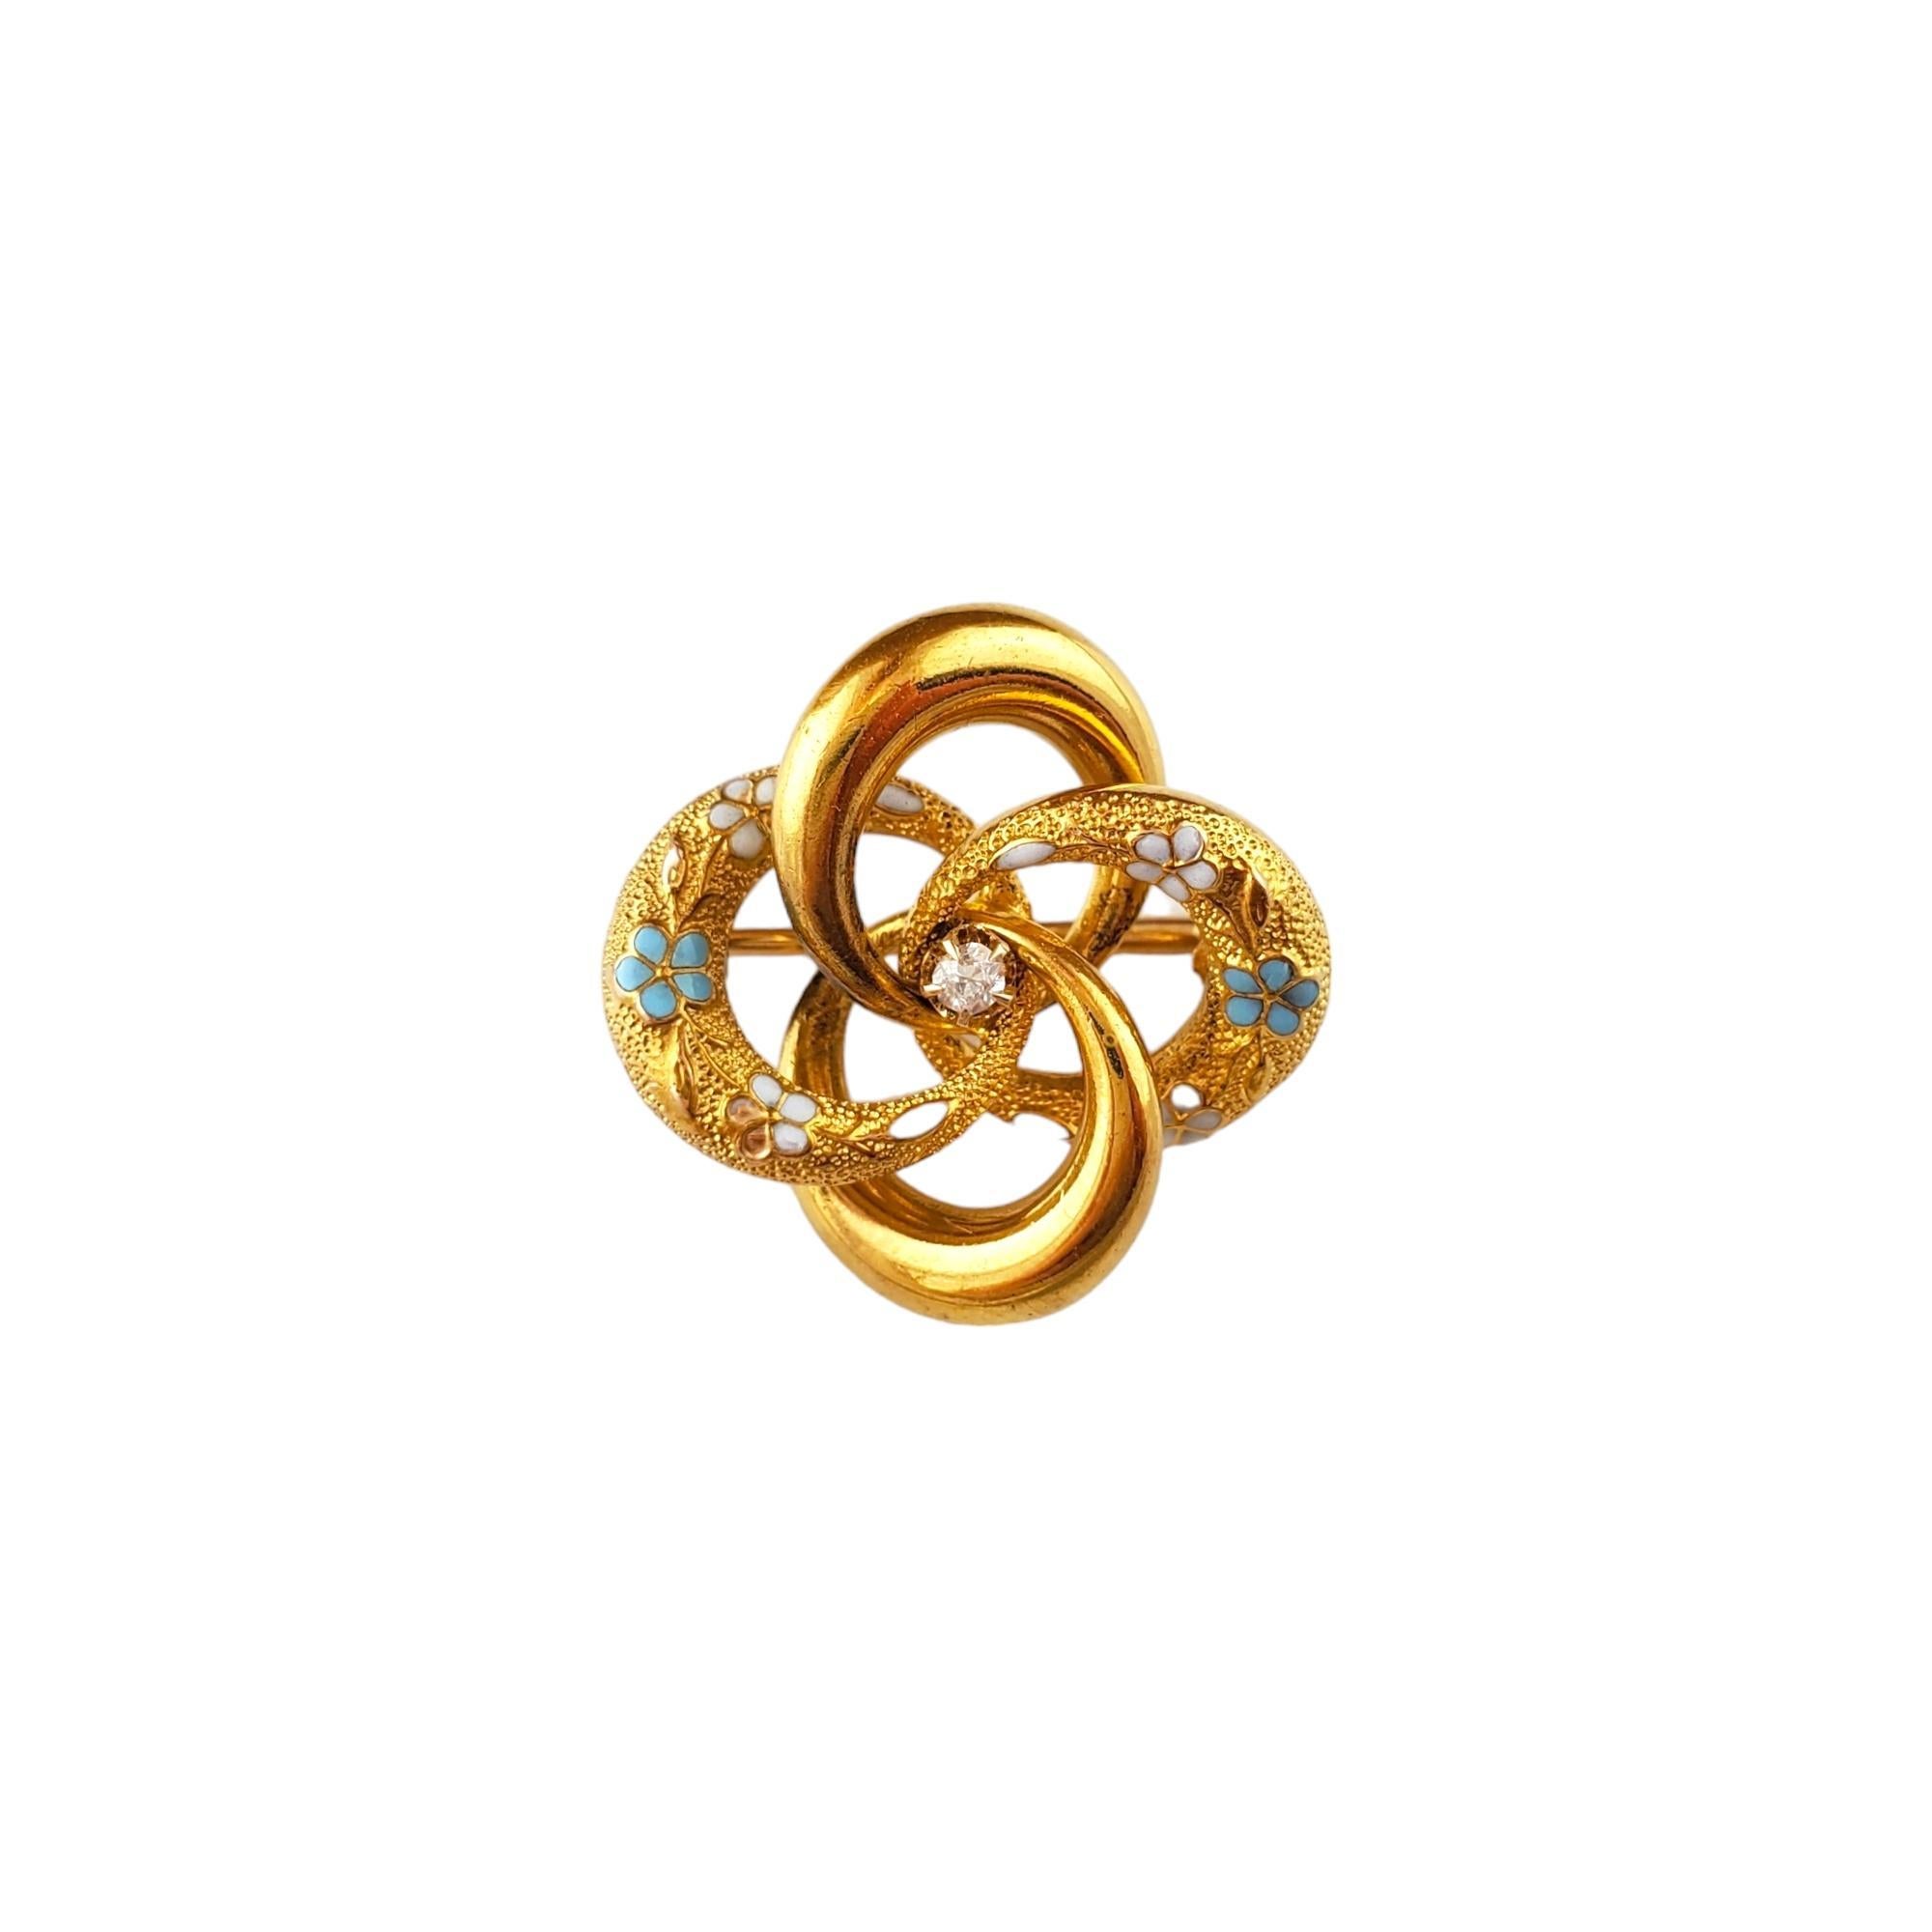 Vintage 14K Yellow Gold Floral Pin with Diamond and Enamel - 

This floral pin is intricately designed with beautiful petals and is a botanical addition to any outfit. 

Old Mine Diamond approx. .02cts,  SI1 clarity, G color

Weight: 2.0 dwt/ 3.2